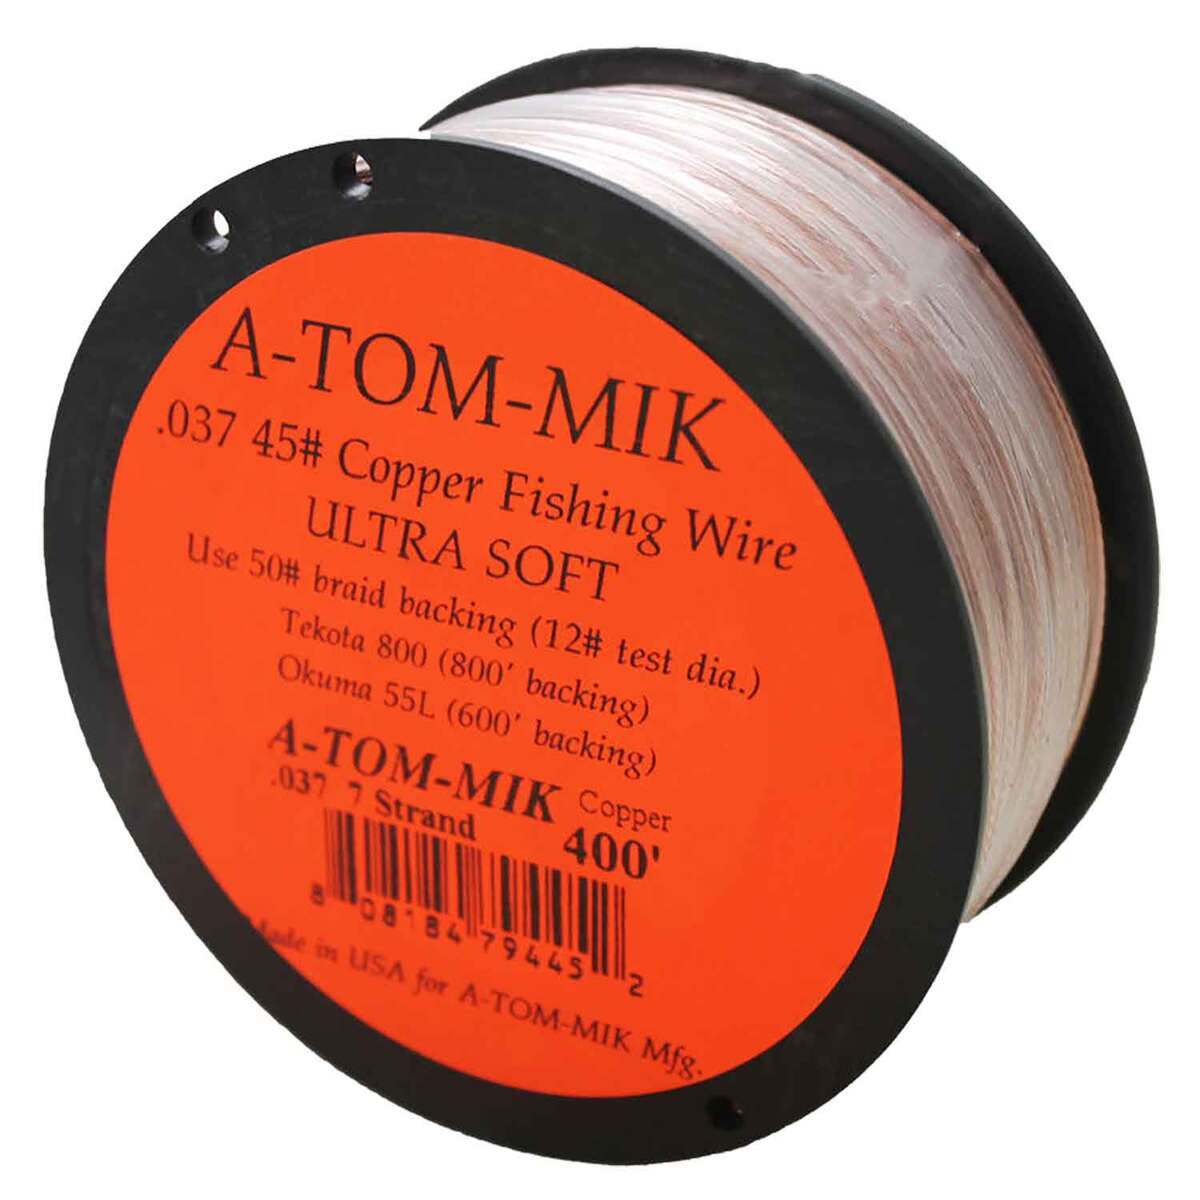 A-TOM-MIK Copper Fishing Wire Line-400